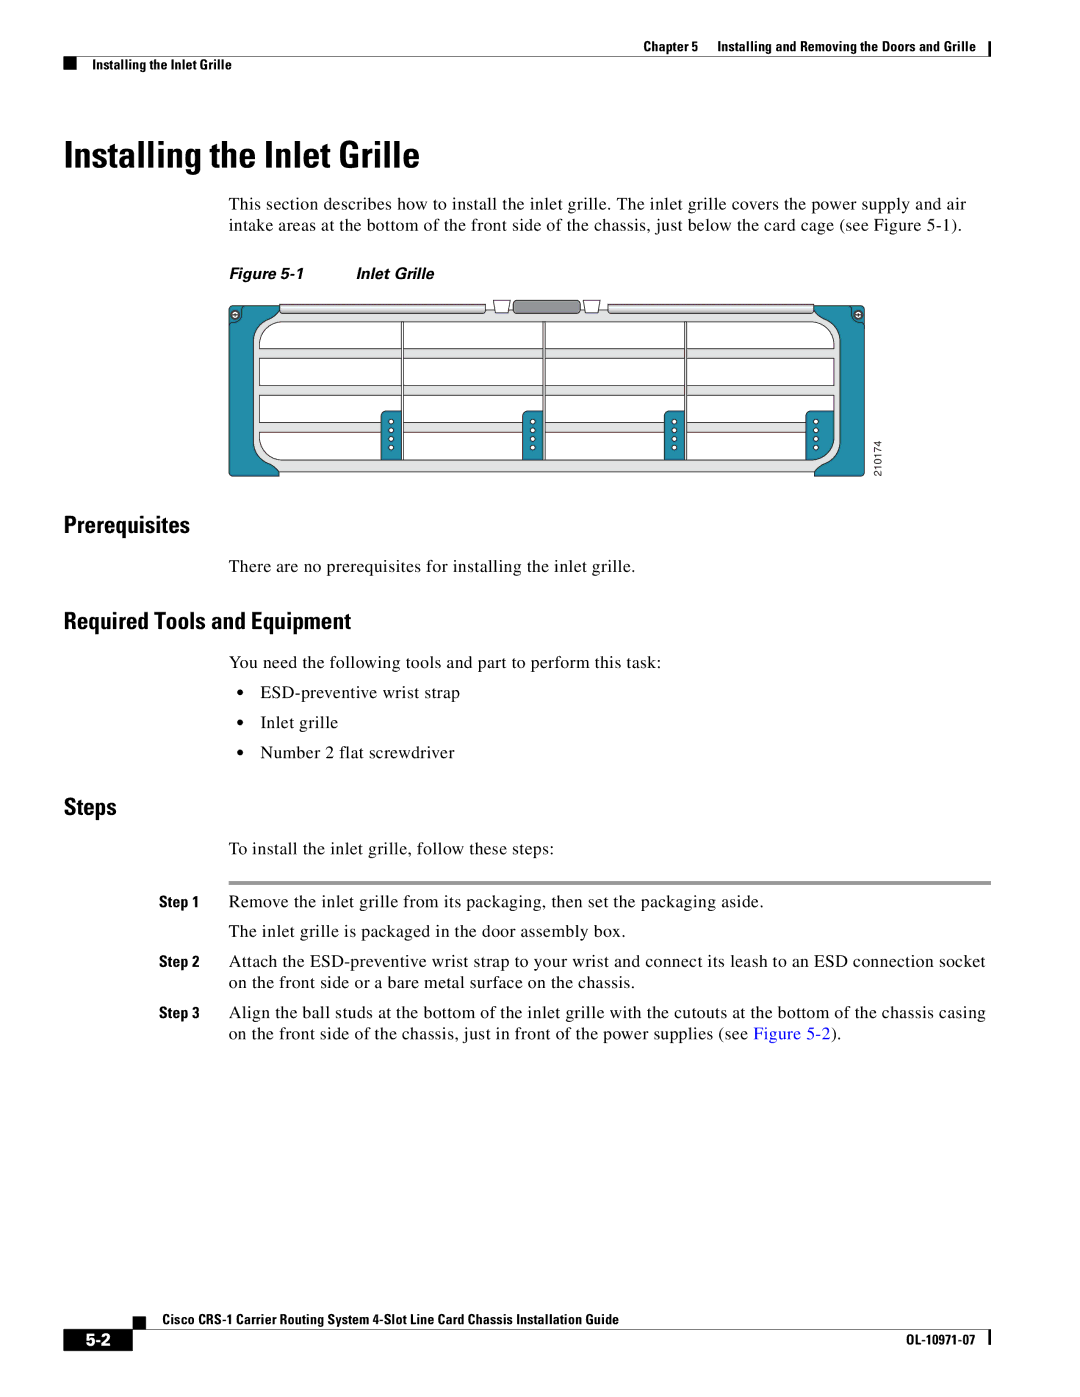 Cisco Systems Cisco CRS-1 manual Installing the Inlet Grille, Prerequisites 